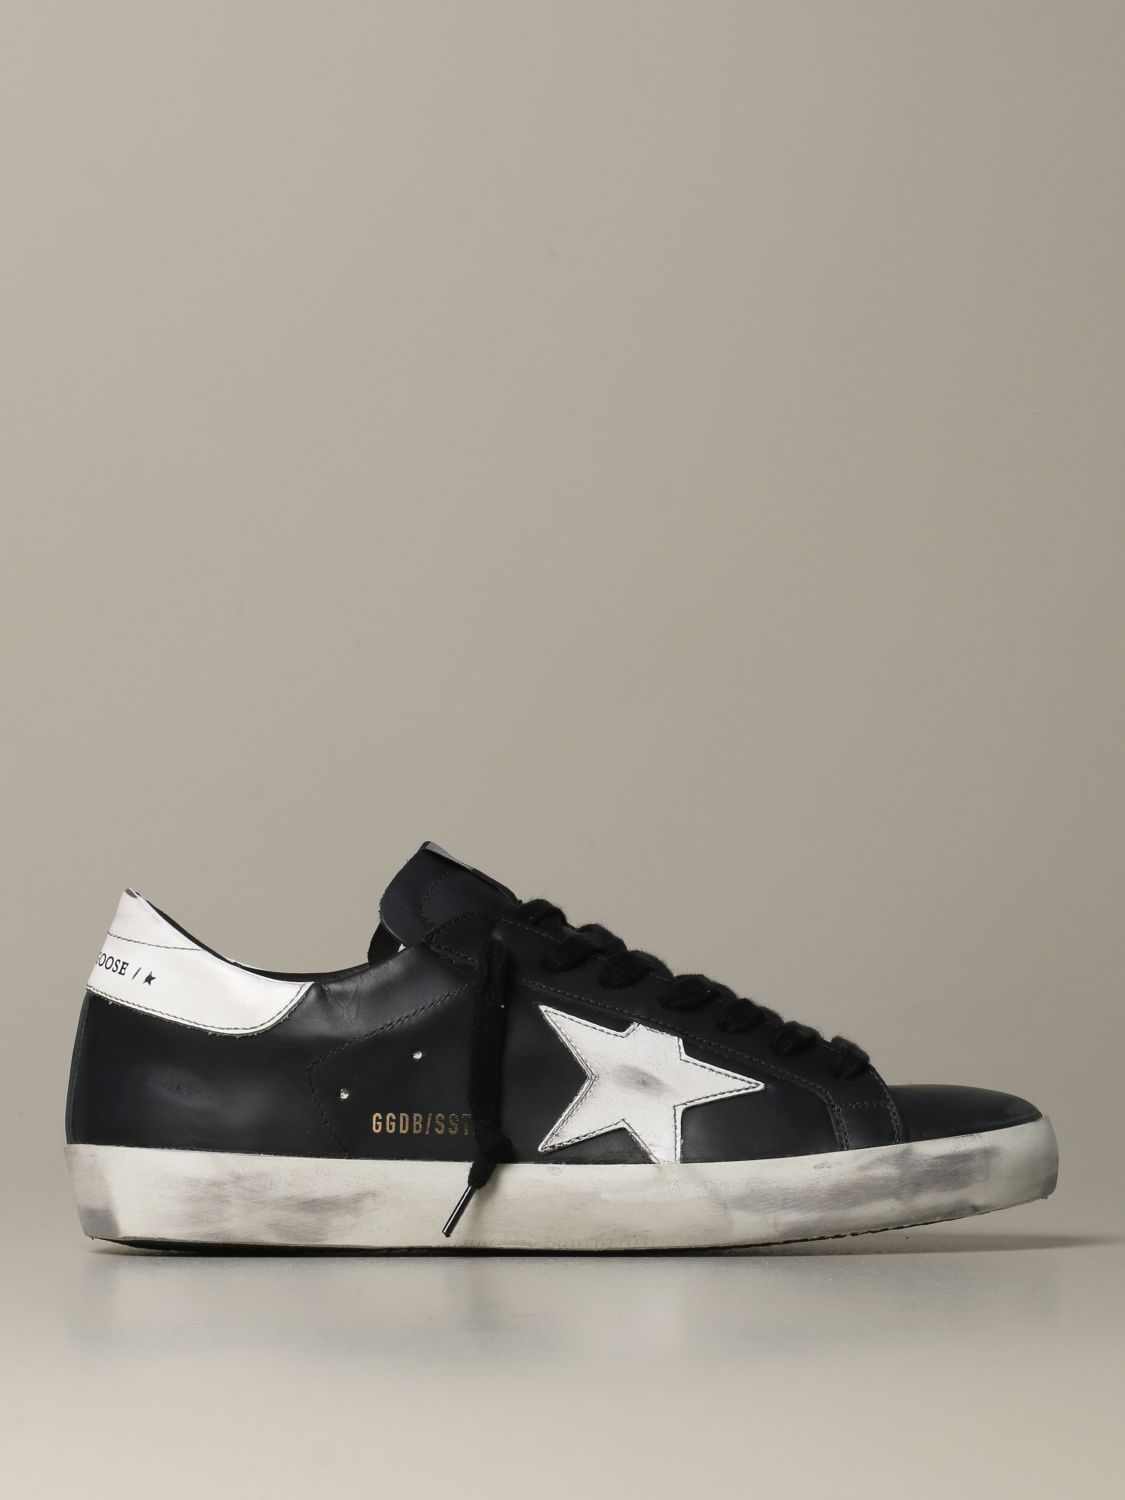 golden goose black leather sneakers